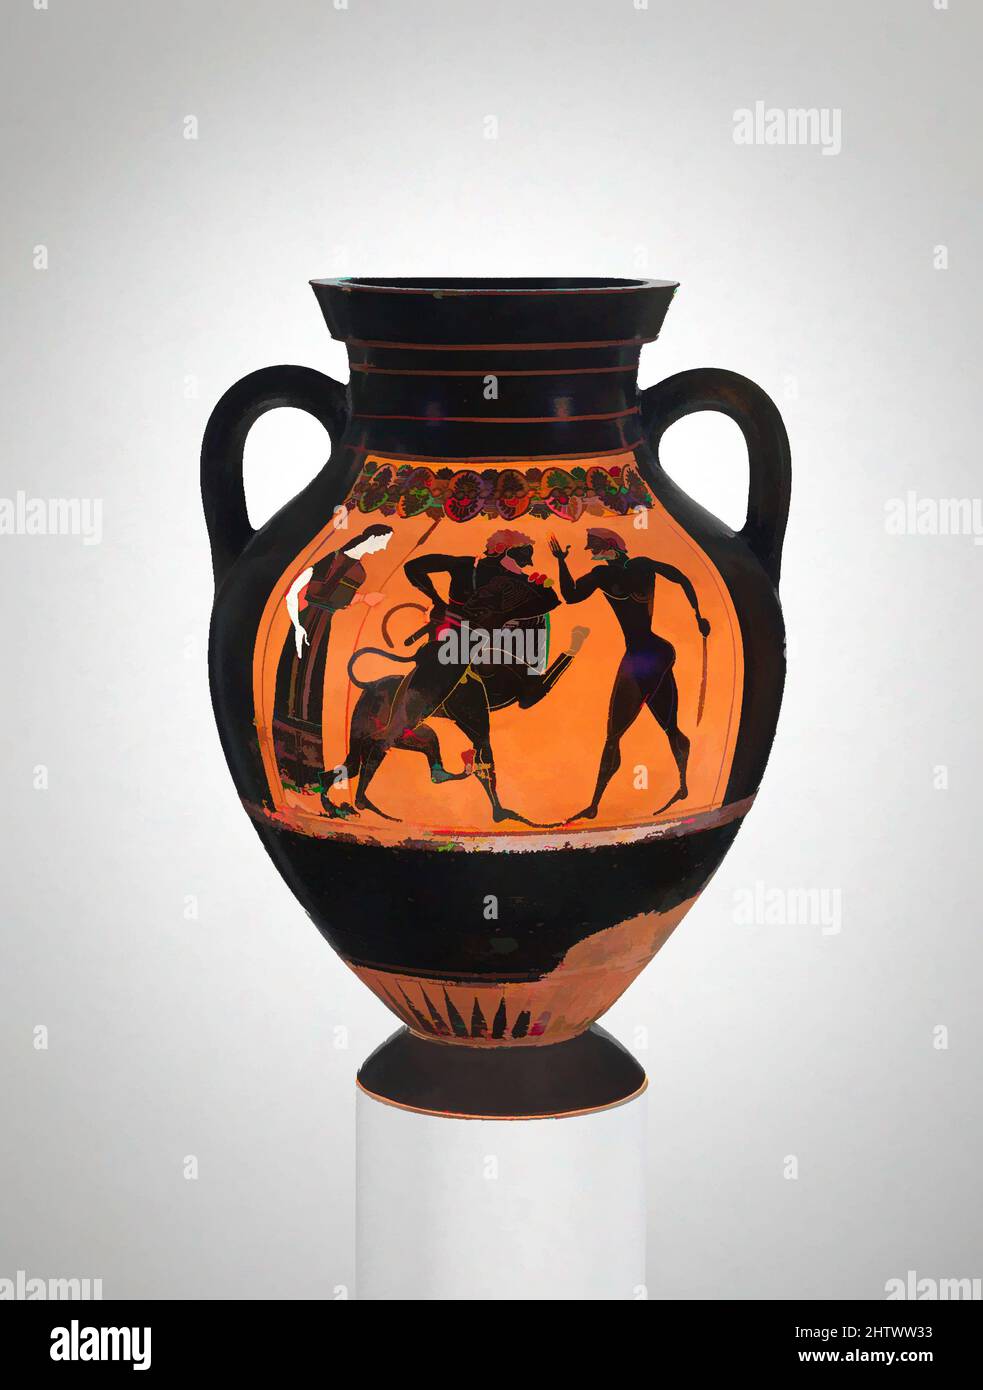 Art inspired by Terracotta amphora (jar), Archaic, ca. 540 B.C., Greek, Attic, Terracotta; black-figure, H. 14 13/16 in. (37.7 cm), Vases, Obverse, Herakles wrestling the Nemean Lion, Reverse, Herakles fighting Geryon. Group E is the name given to a workshop of painters active during, Classic works modernized by Artotop with a splash of modernity. Shapes, color and value, eye-catching visual impact on art. Emotions through freedom of artworks in a contemporary way. A timeless message pursuing a wildly creative new direction. Artists turning to the digital medium and creating the Artotop NFT Stock Photo